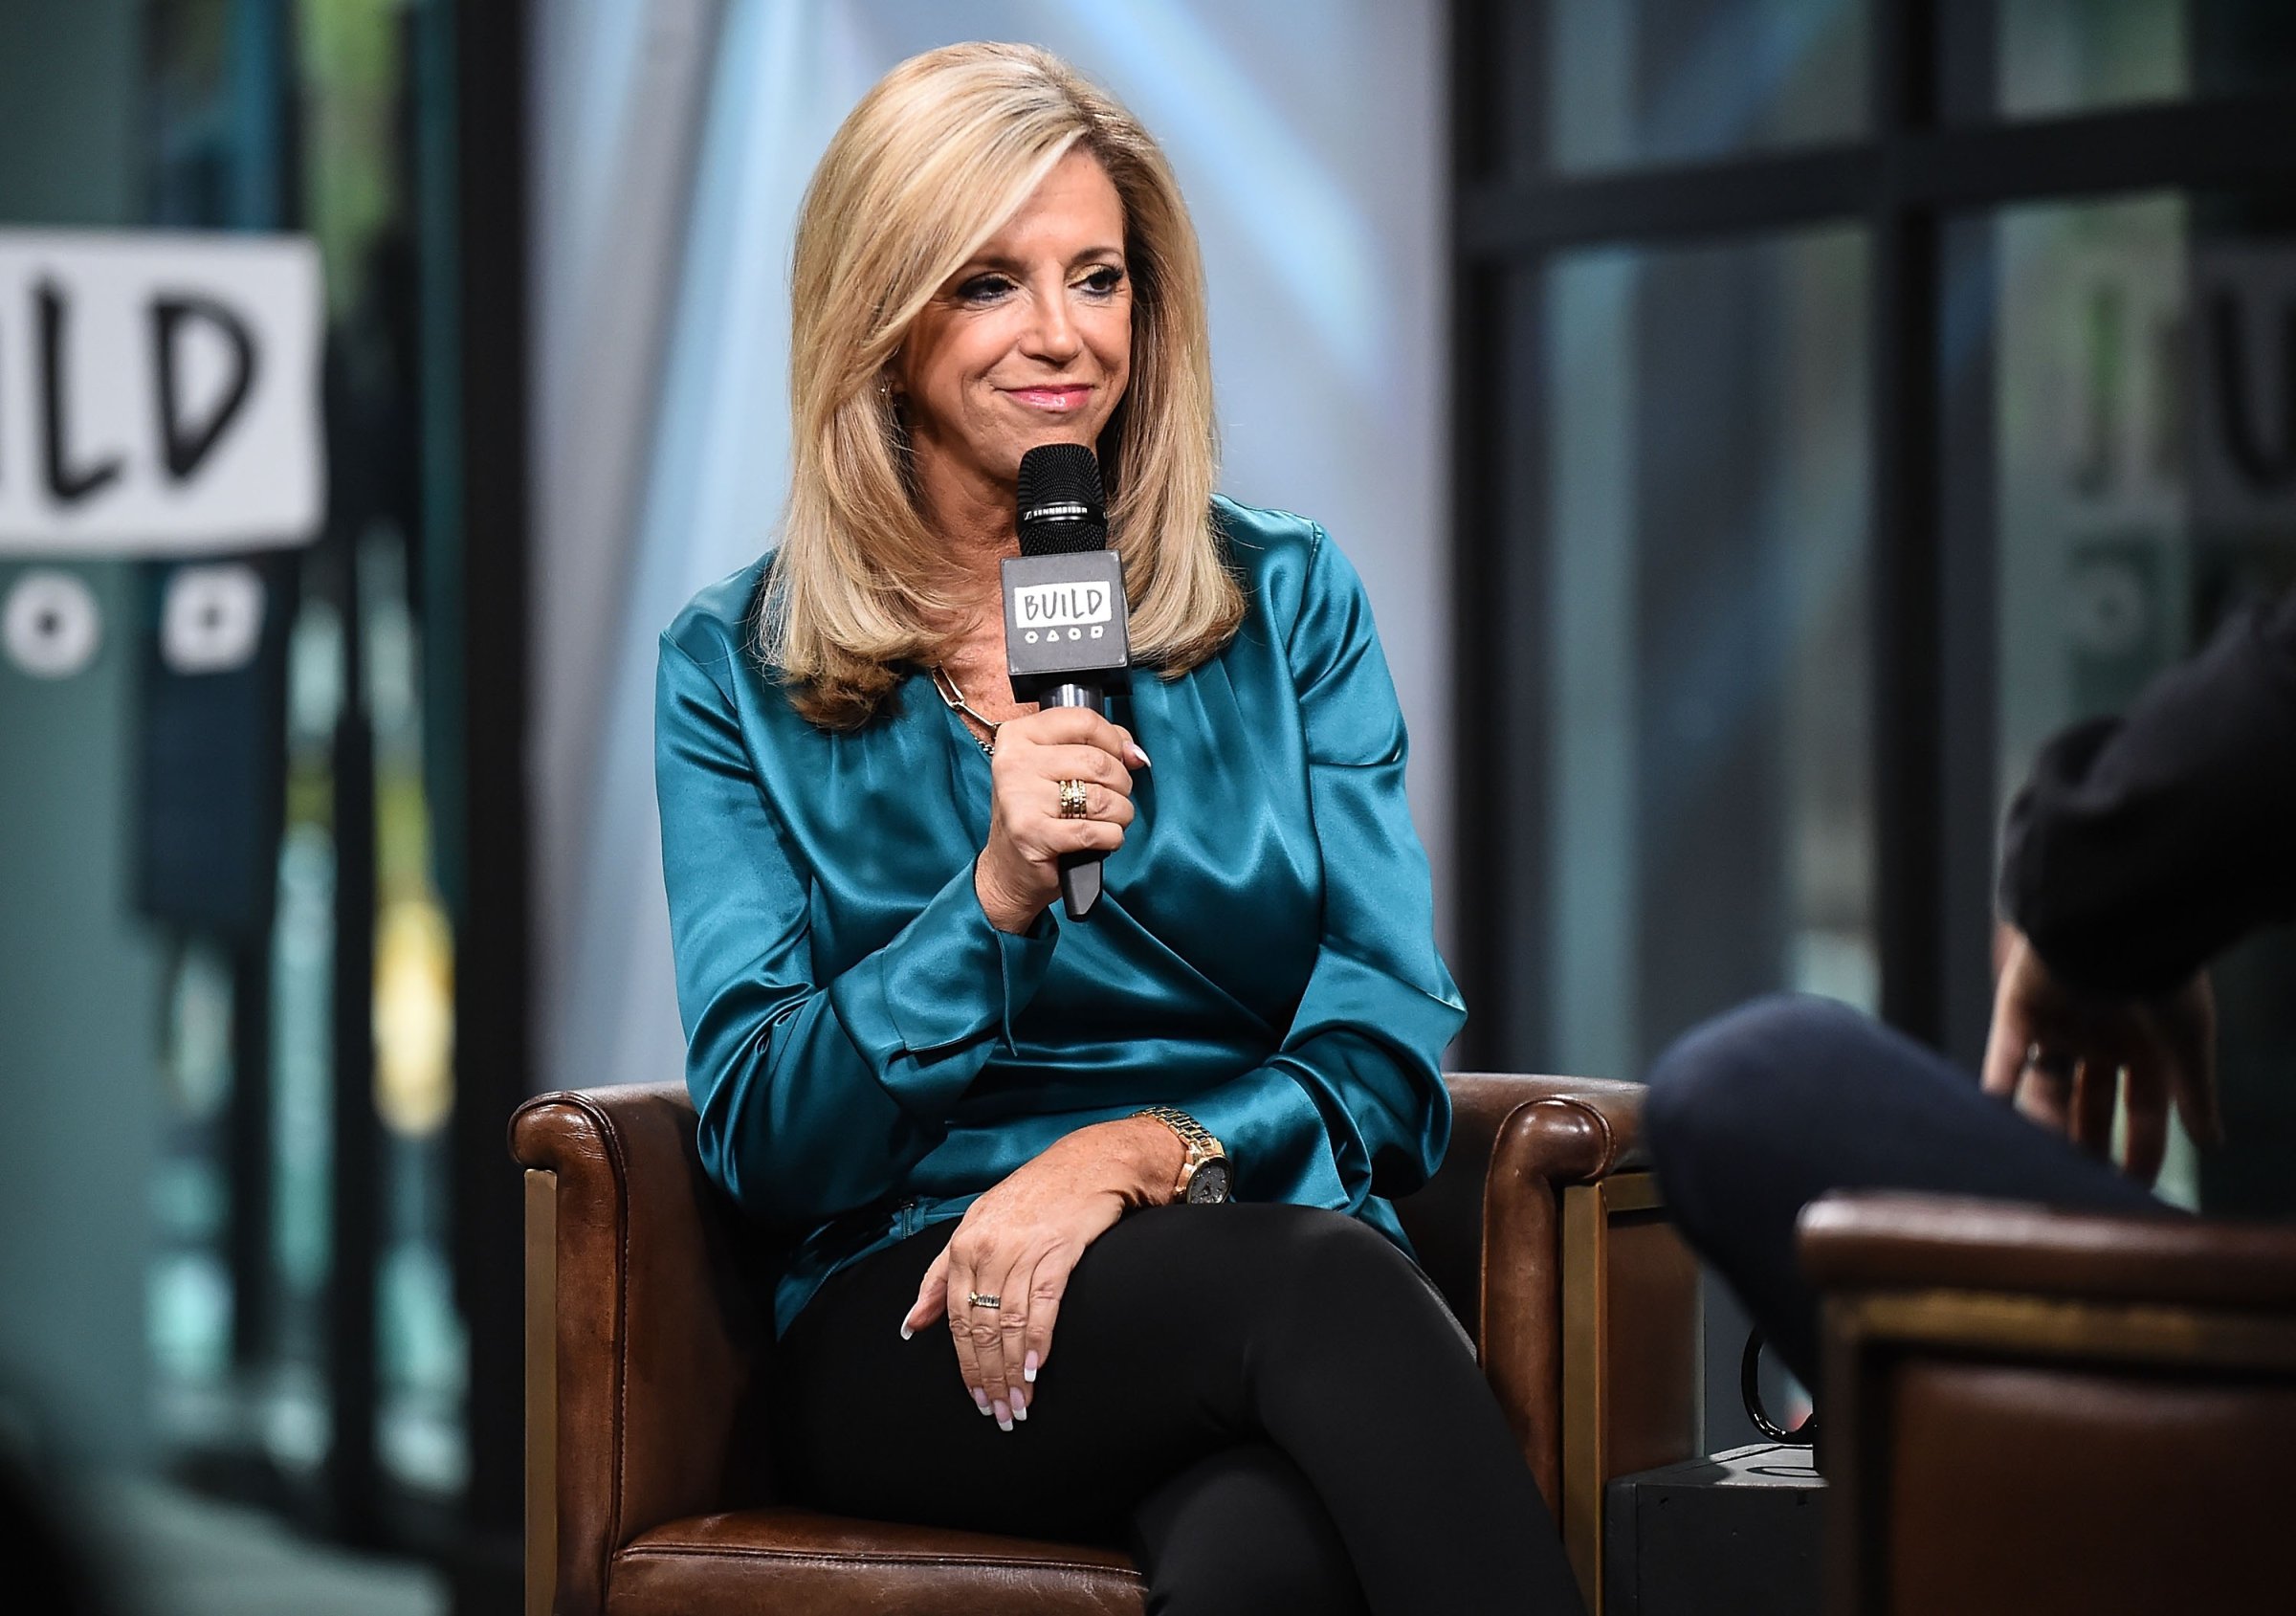 Build Presents Joy Mangano Discussing "Inventing Joy: Dare To Build A Brave & Creative Life"